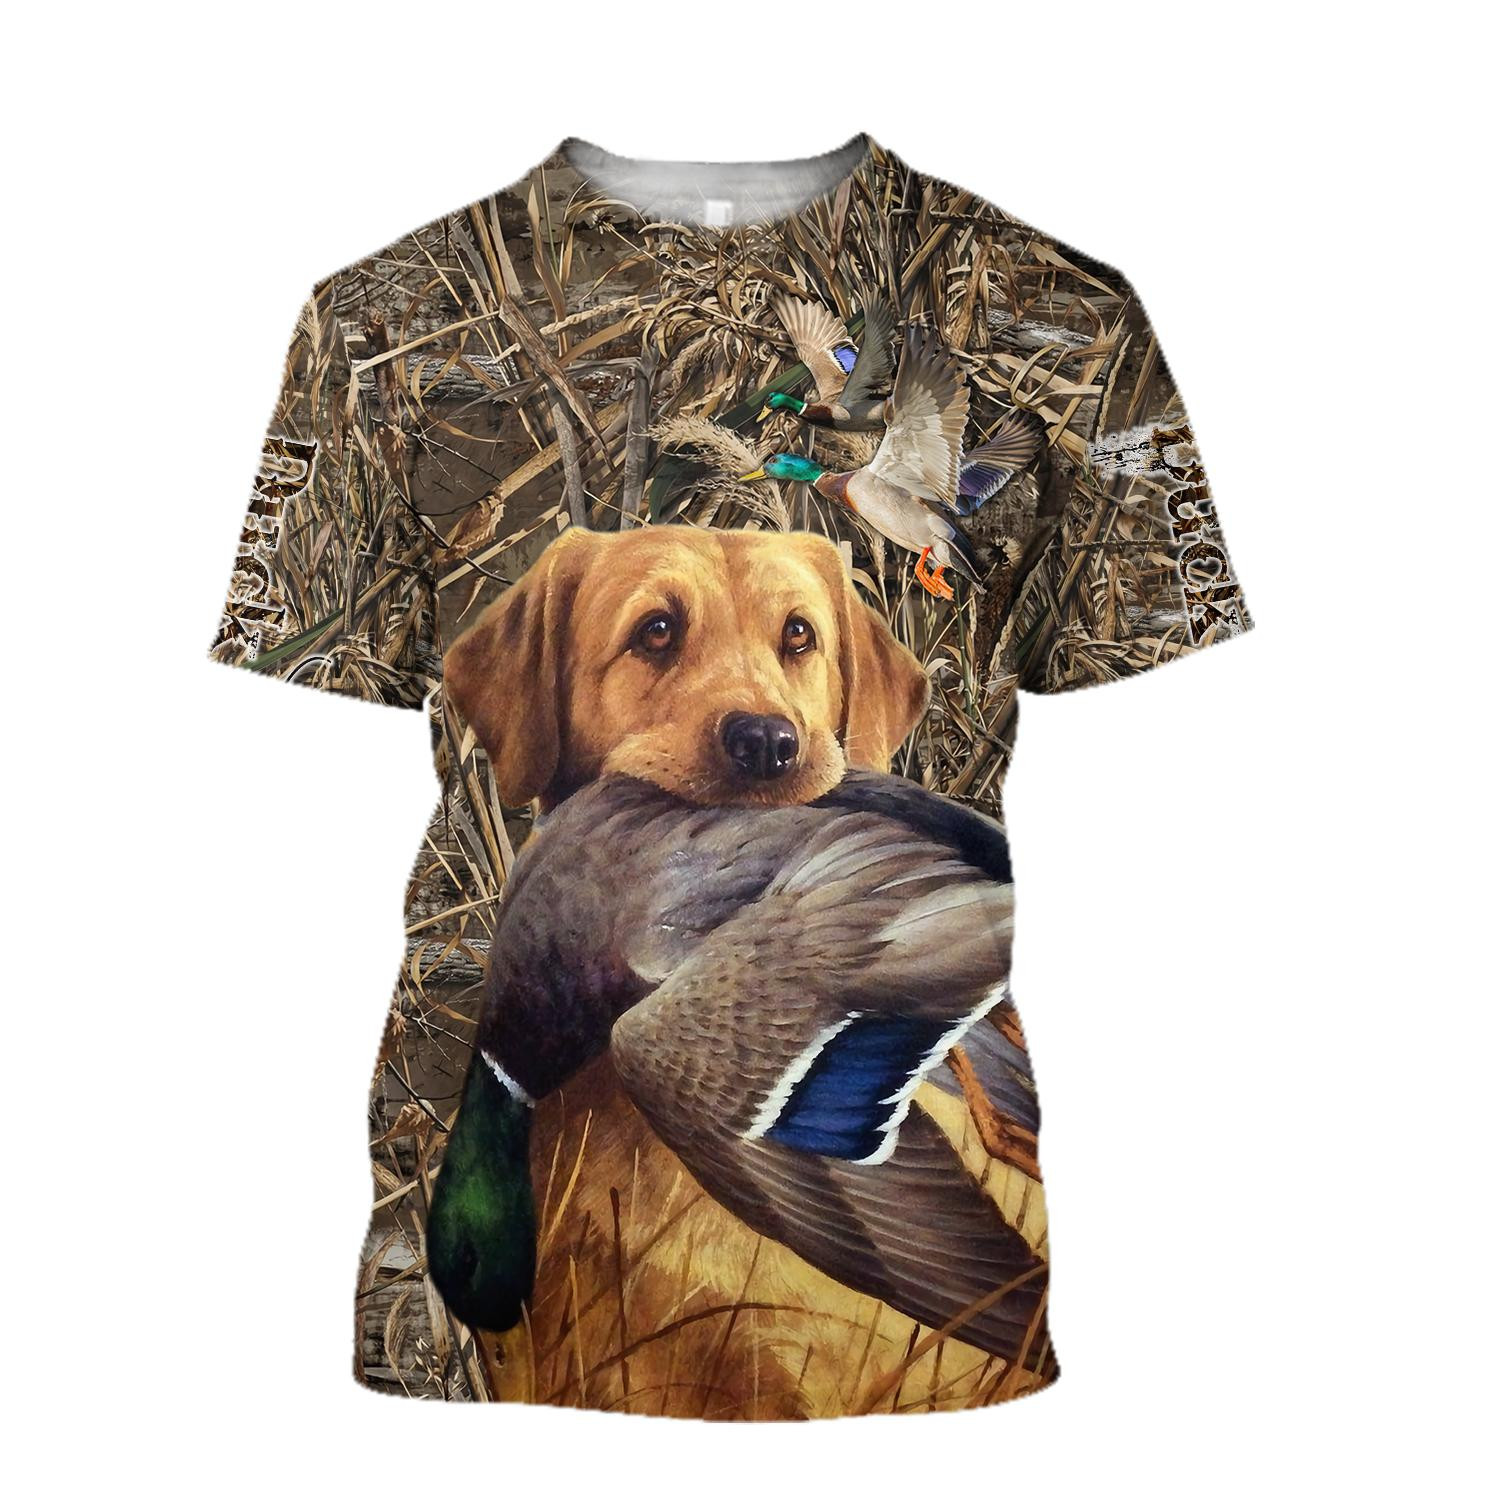 Mallard Duck Hunting 3D All Over Printed Shirts for Men and Women AM261001